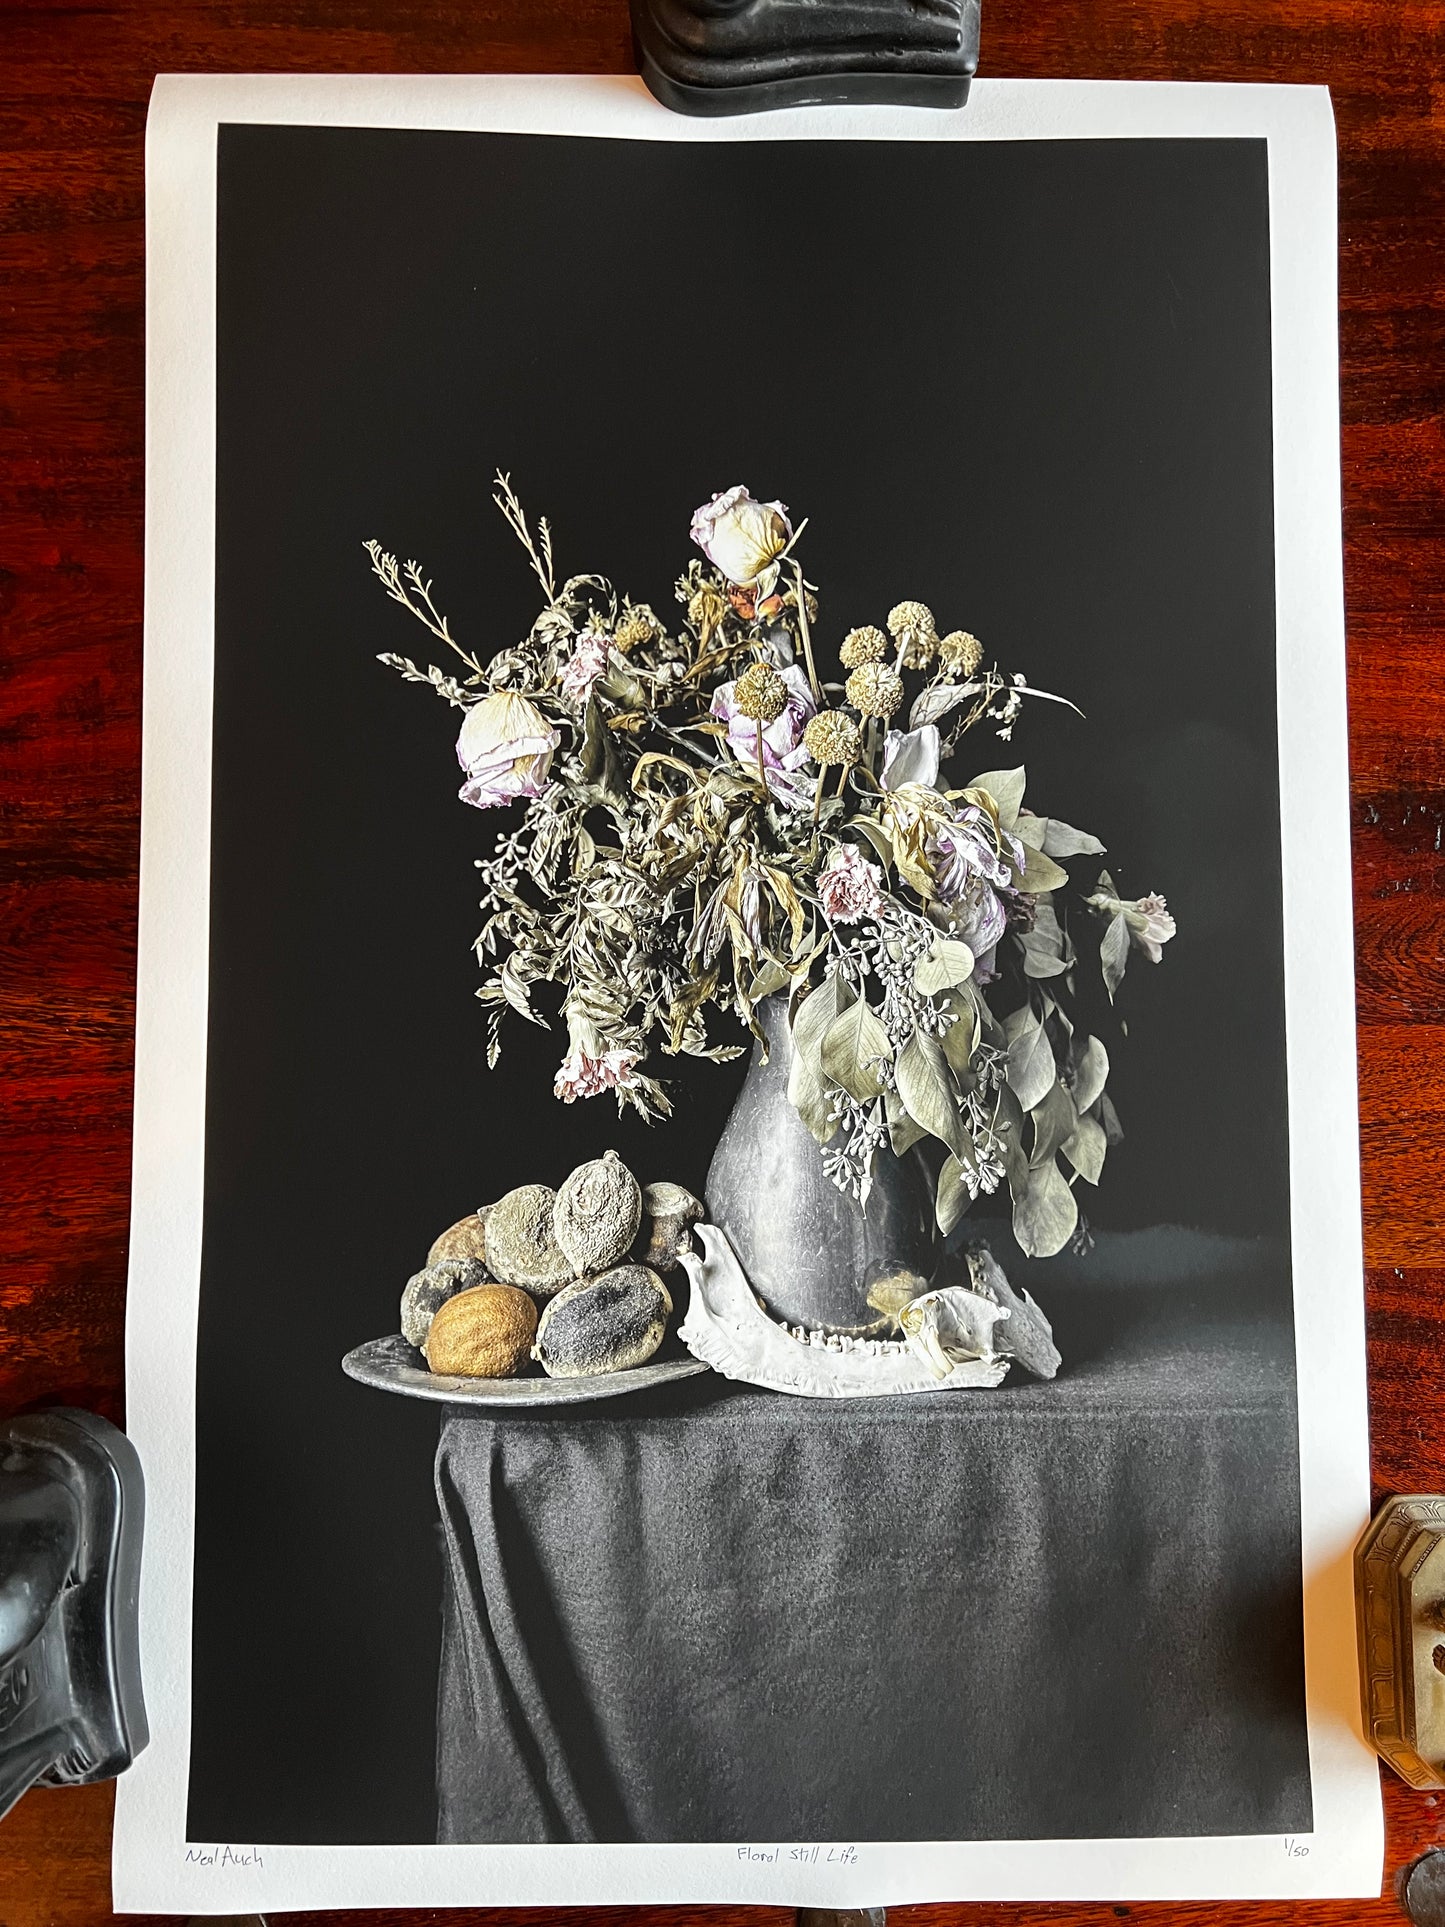 Neal Auch, Floral Still Life - Signed Print